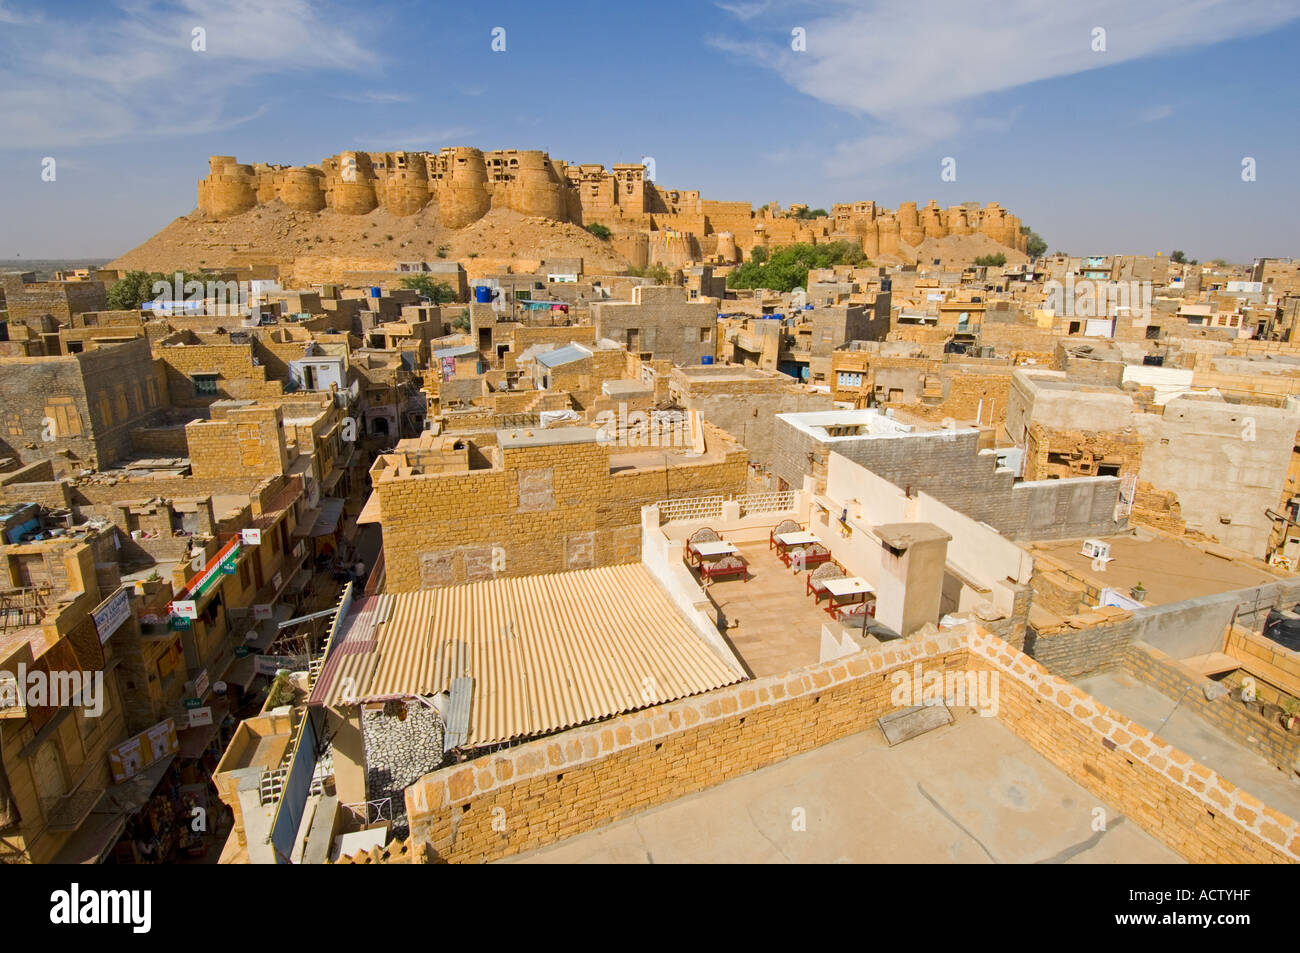 Taken from the roof of a tall building in the town of Jaisalmer with the 'sand-castle' like golden Jaisalmer Fort behind. Stock Photo